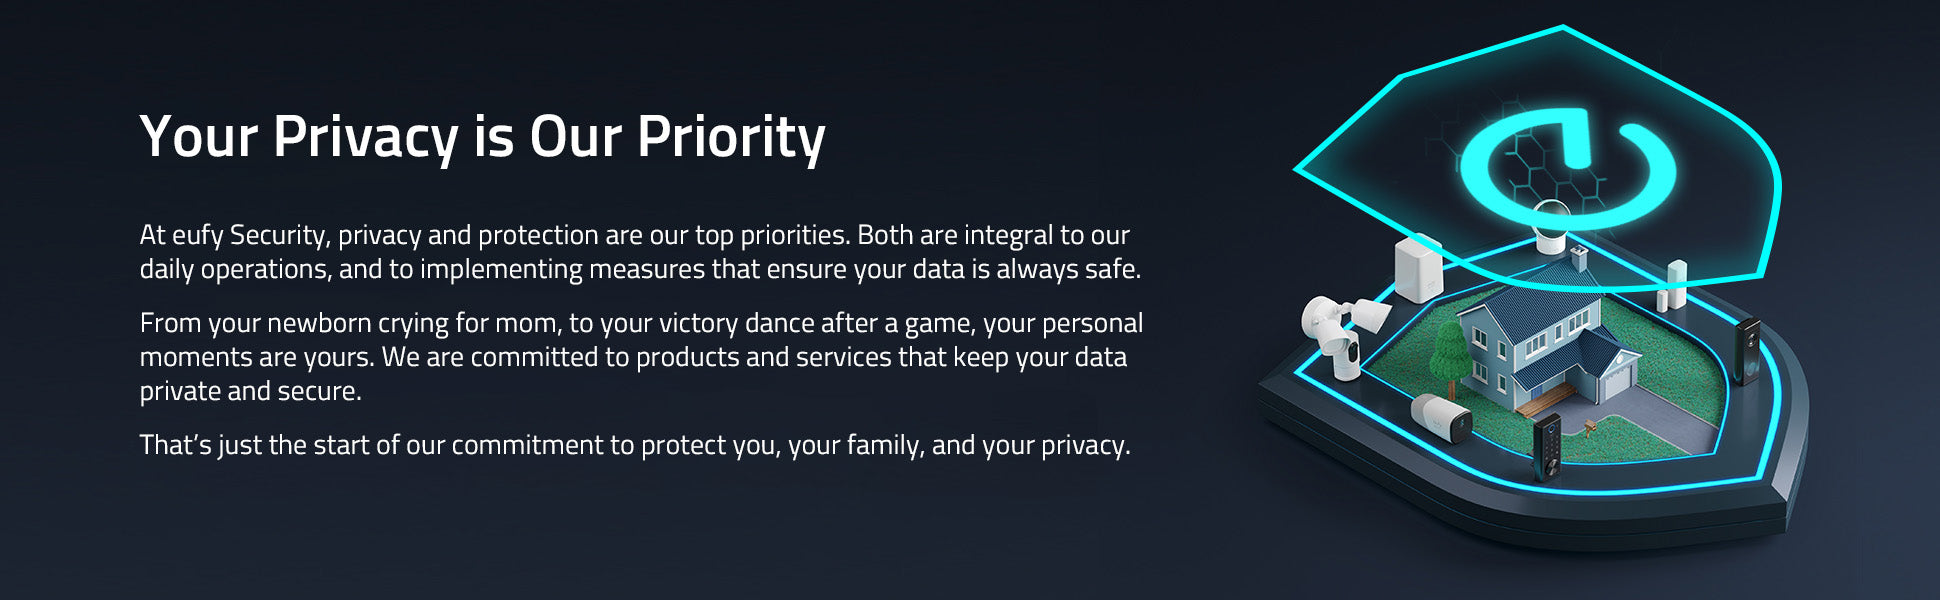 Your_Privacy_is_Our_Priority_1f515f3a-ea2a-4277-9282-0d62030fd054